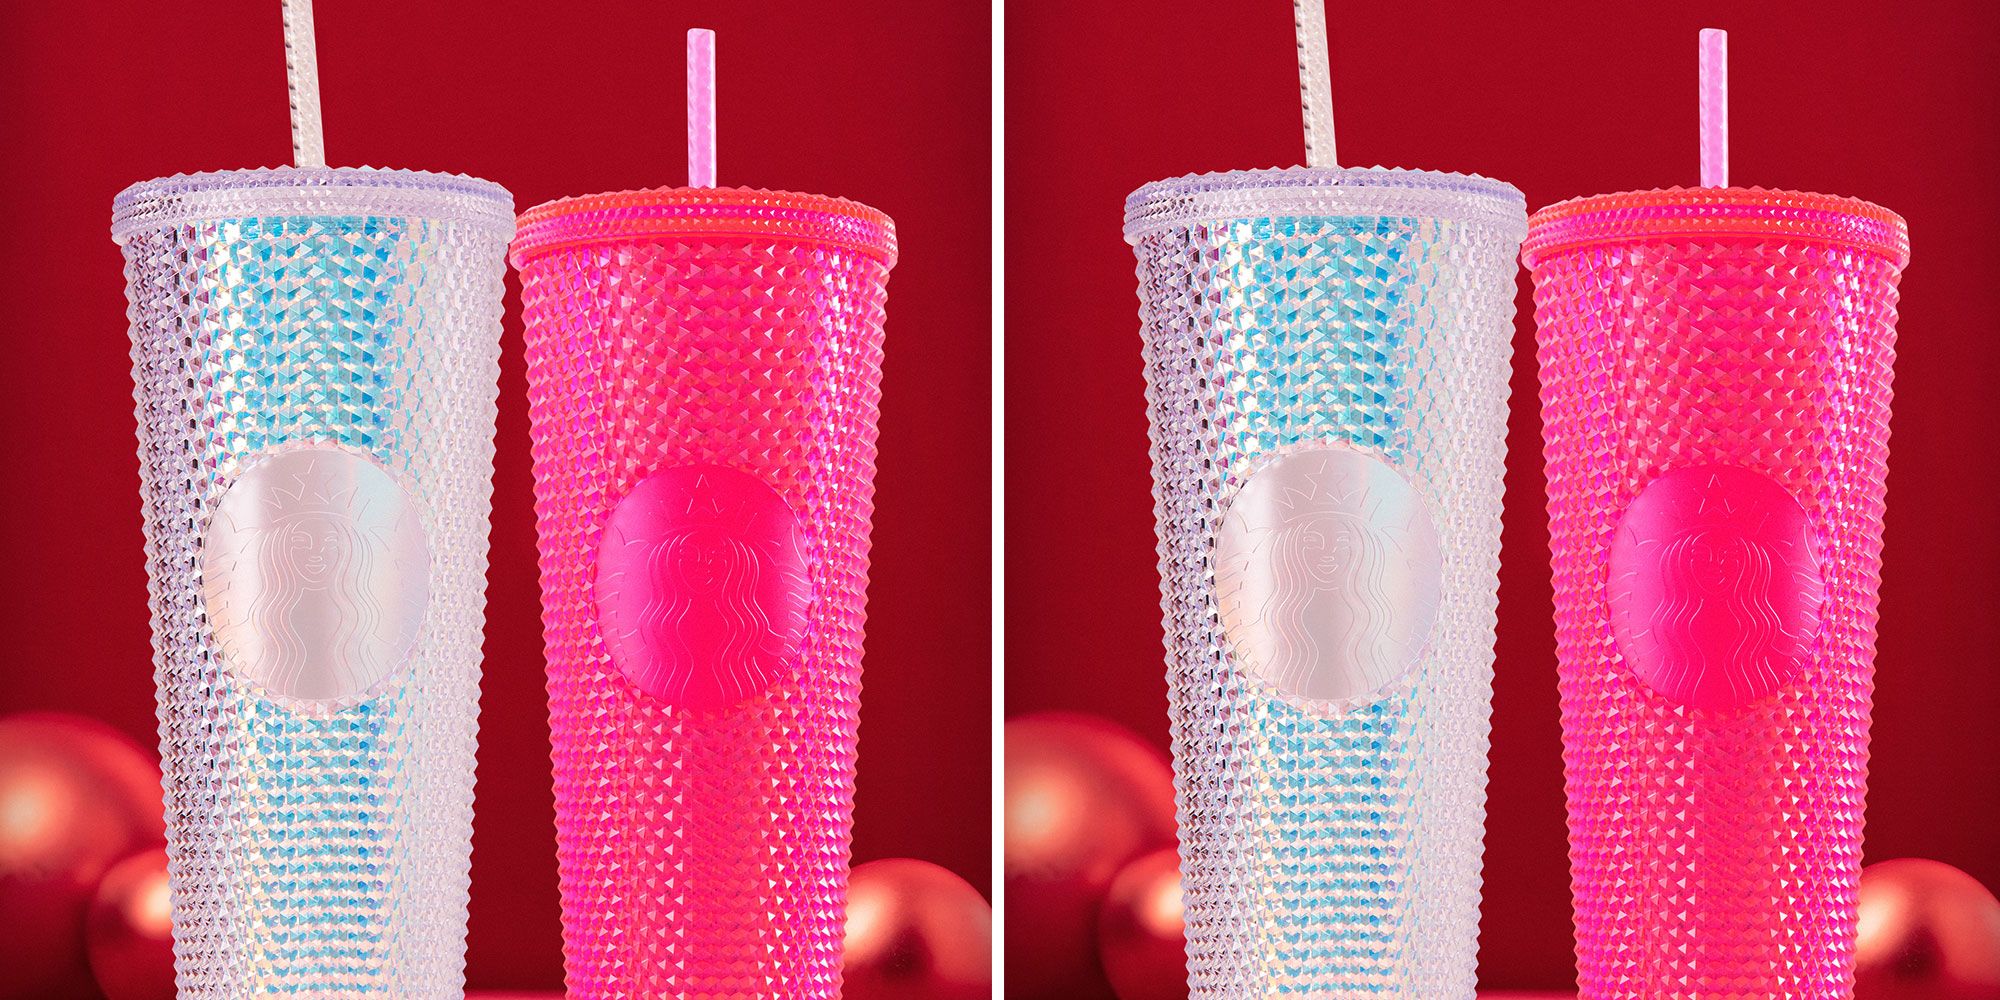 Starbucks holiday cups, tumblers and bottles released for gifting